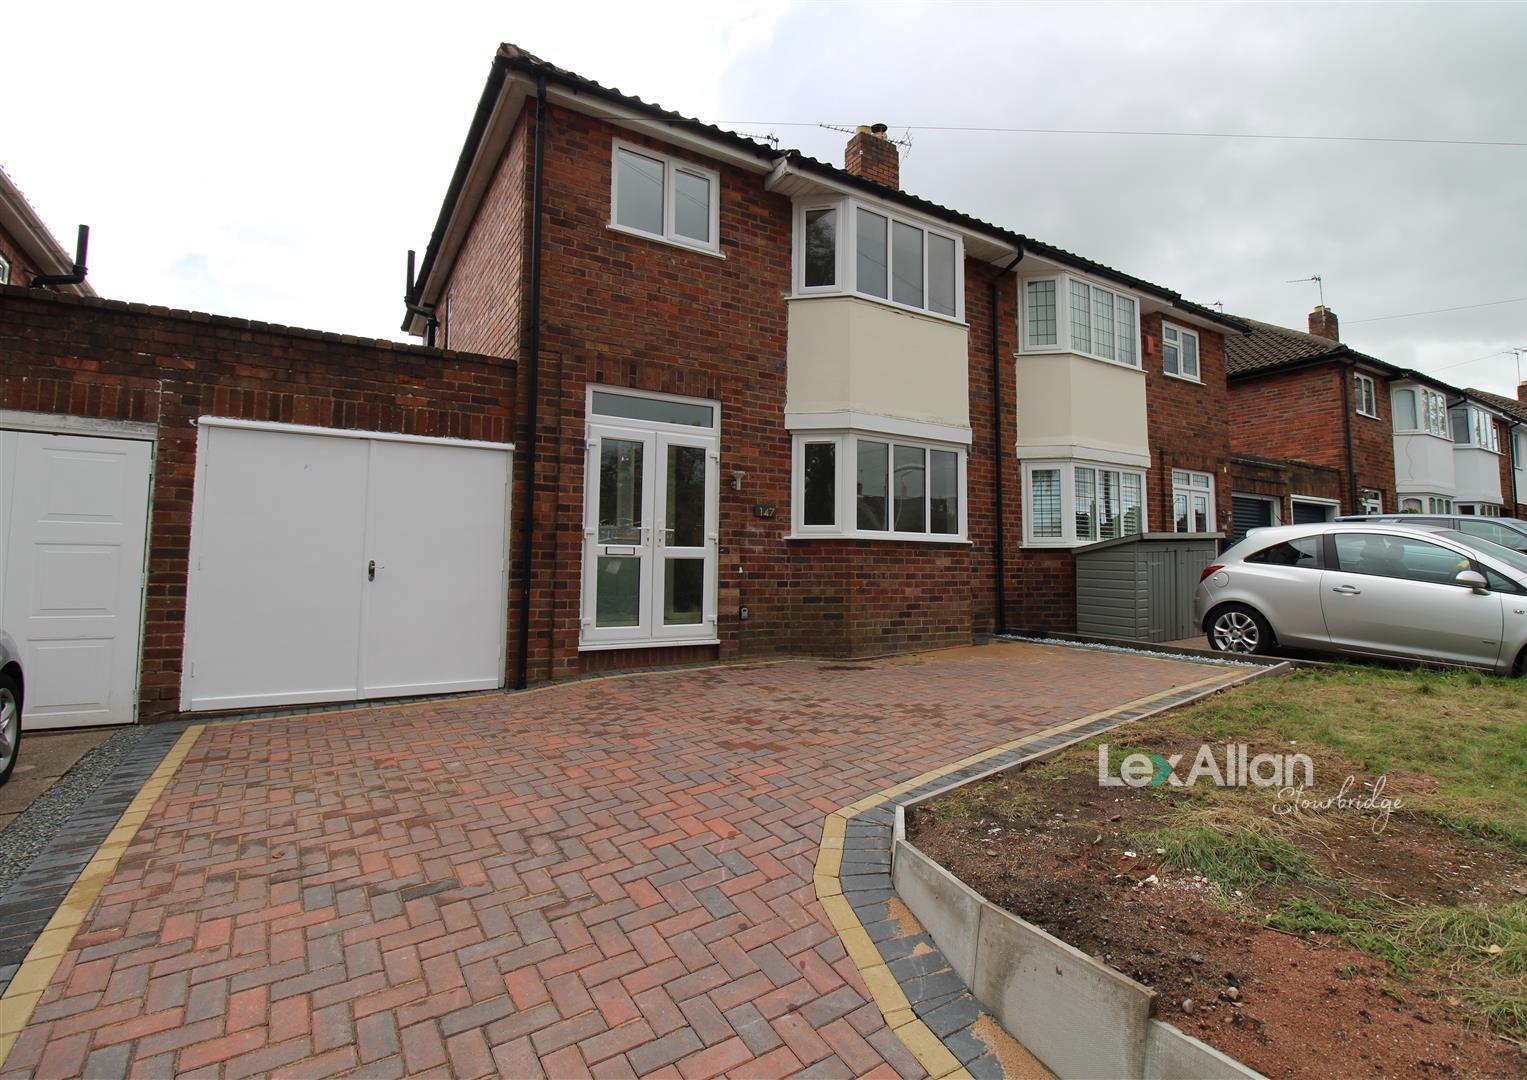 3 bed  for sale in The Broadway, Stourbridge, DY8 